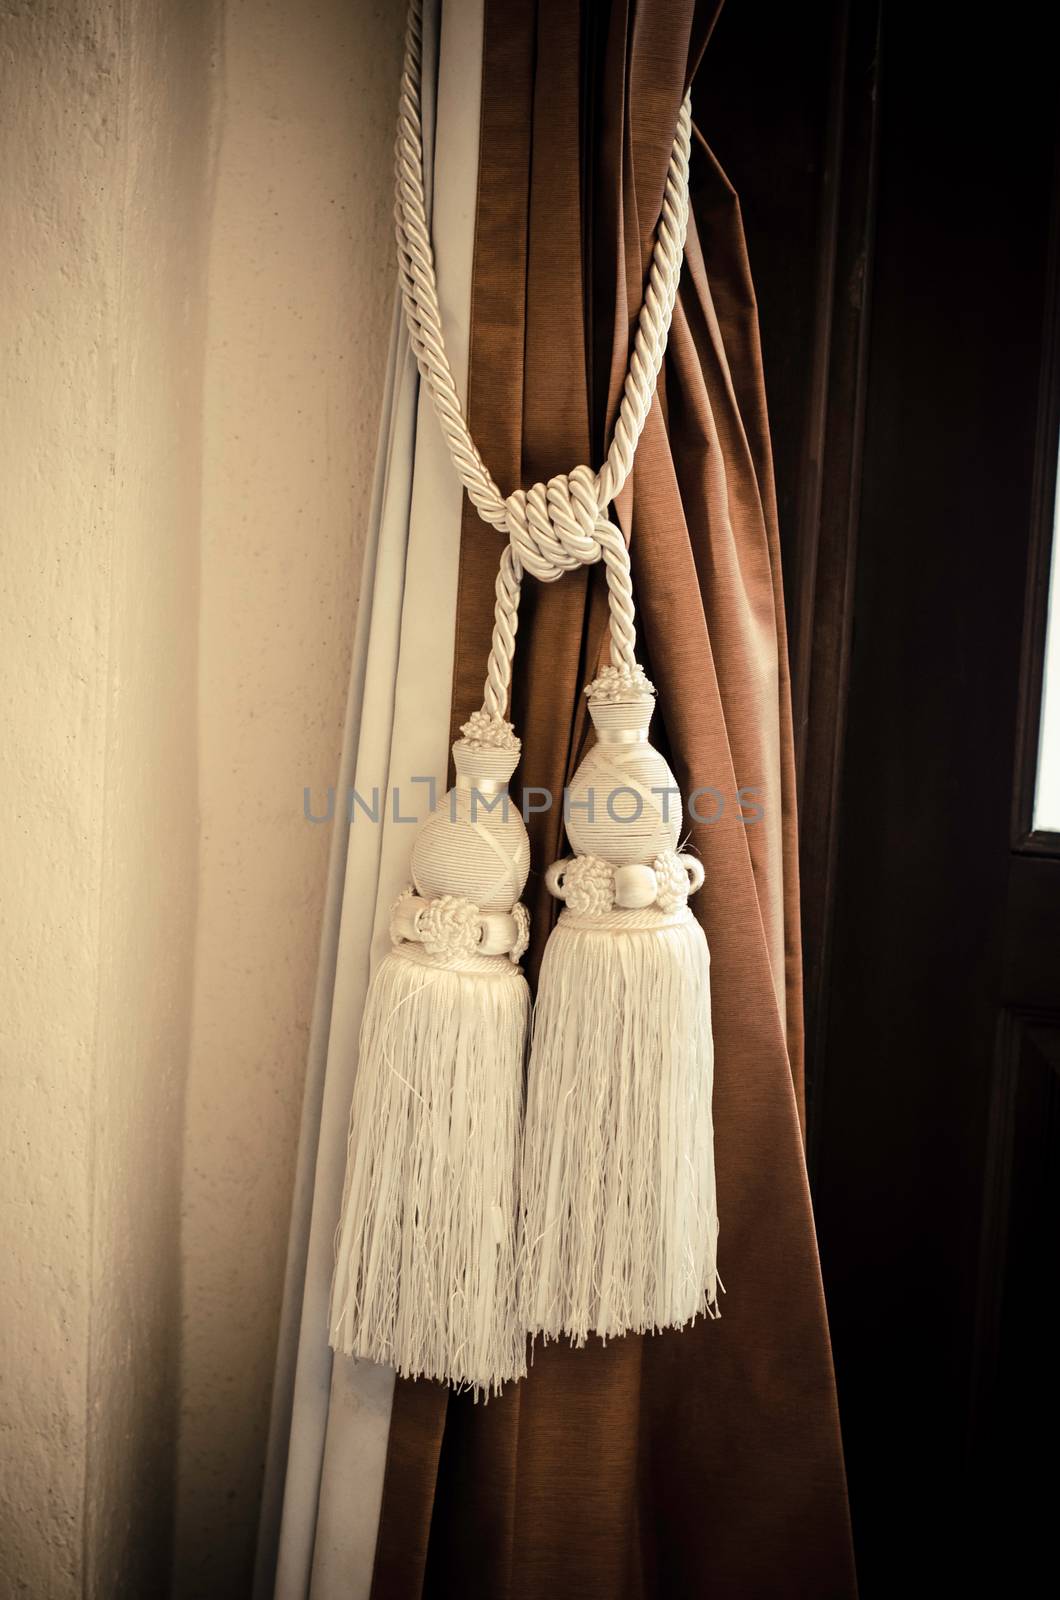 Curtains tied with white tassel. by photobyphotoboy